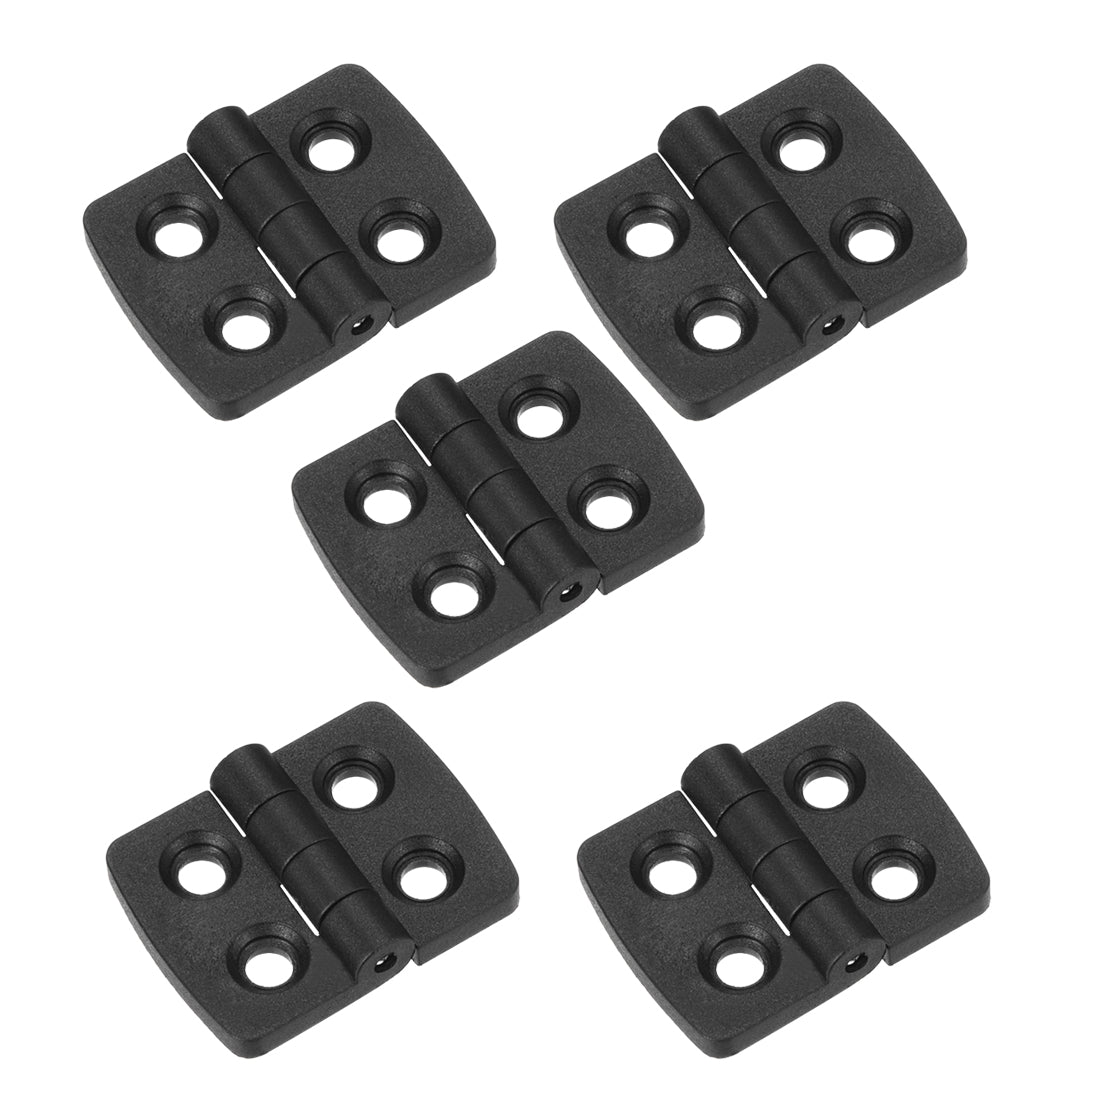 uxcell Uxcell 5pcs Cabinet Gate Closet Door 40mm Length ABS Nylon Hinge